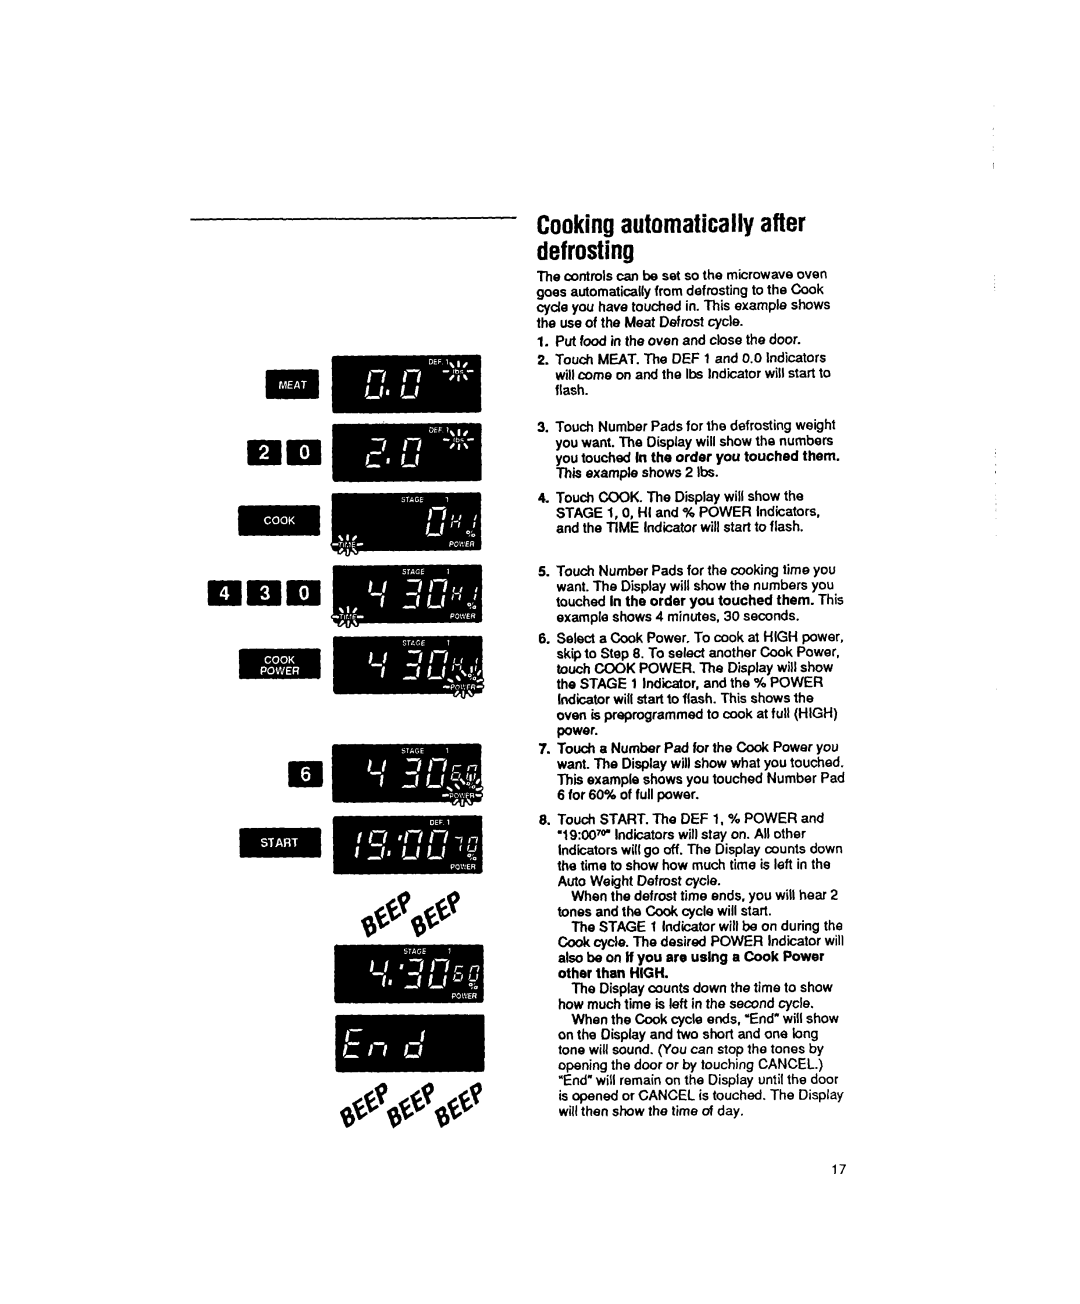 Whirlpool MS3080XY user manual Cookingautomaticallyafter defrosting 